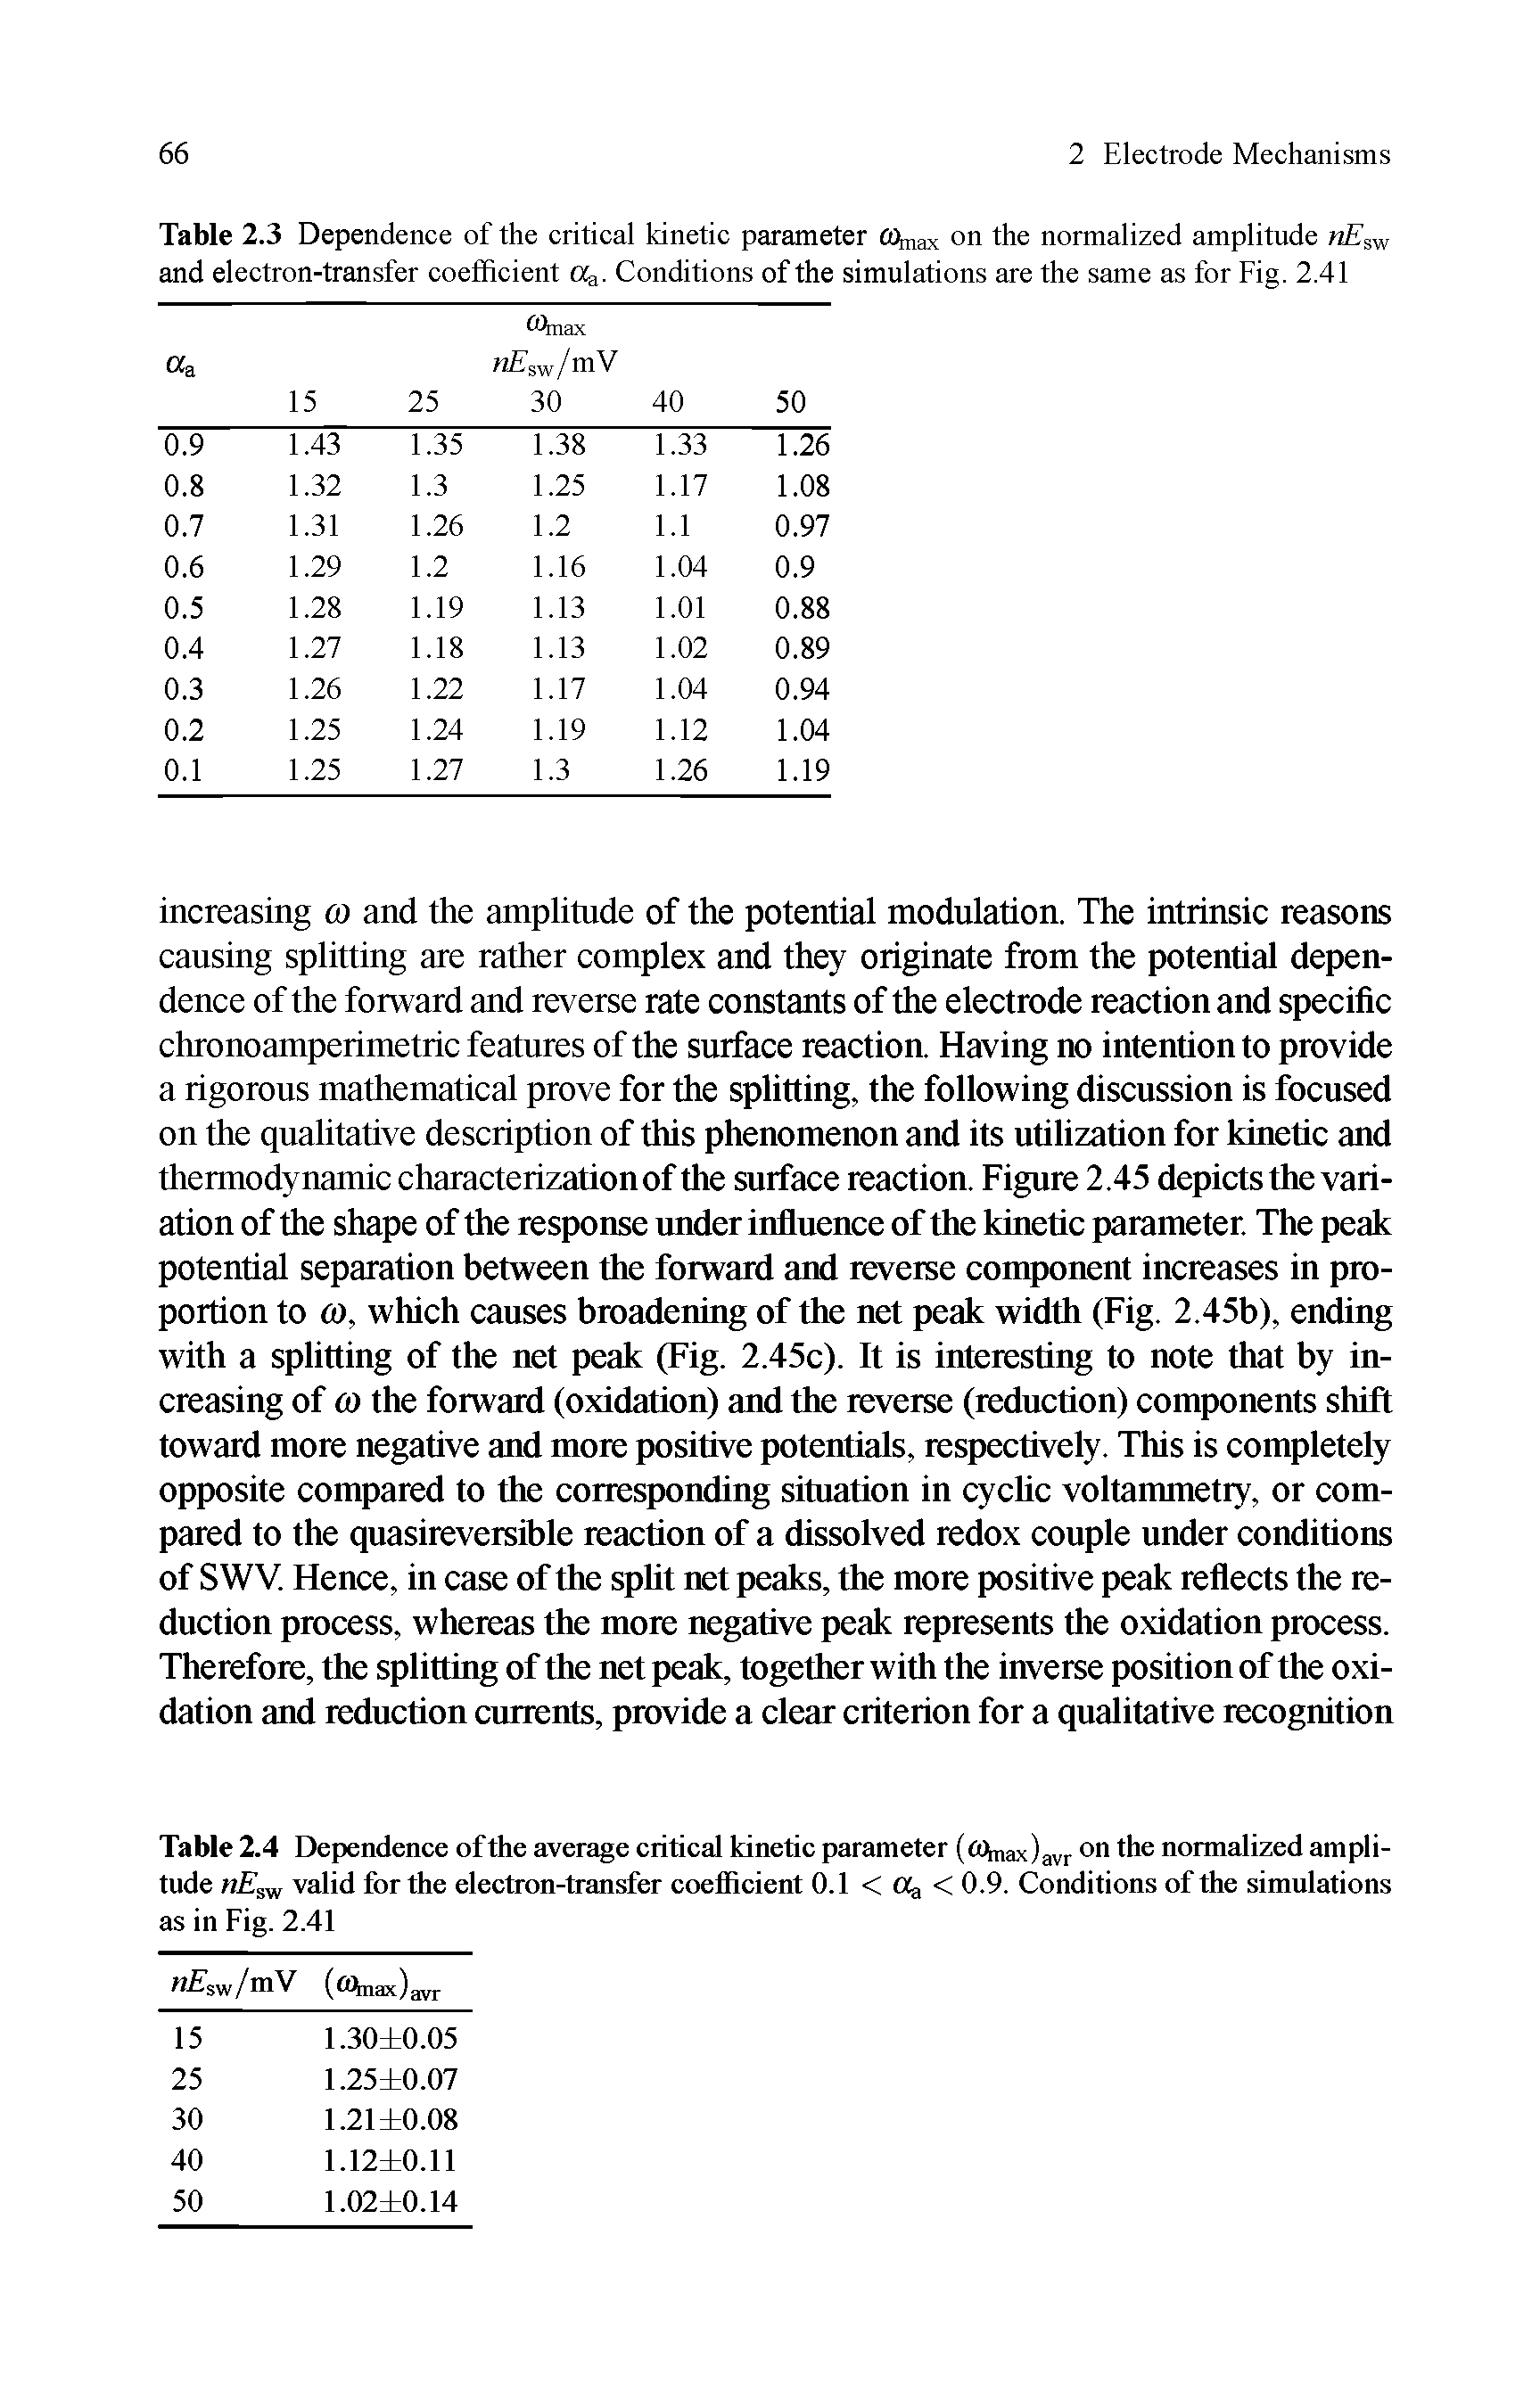 Table 2.3 Dependence of the critical kinetic parameter CO sx on the normalized amplitude and electron-transfer coefficient Oa. Conditions of the simulations are the same as for Fig. 2.41...